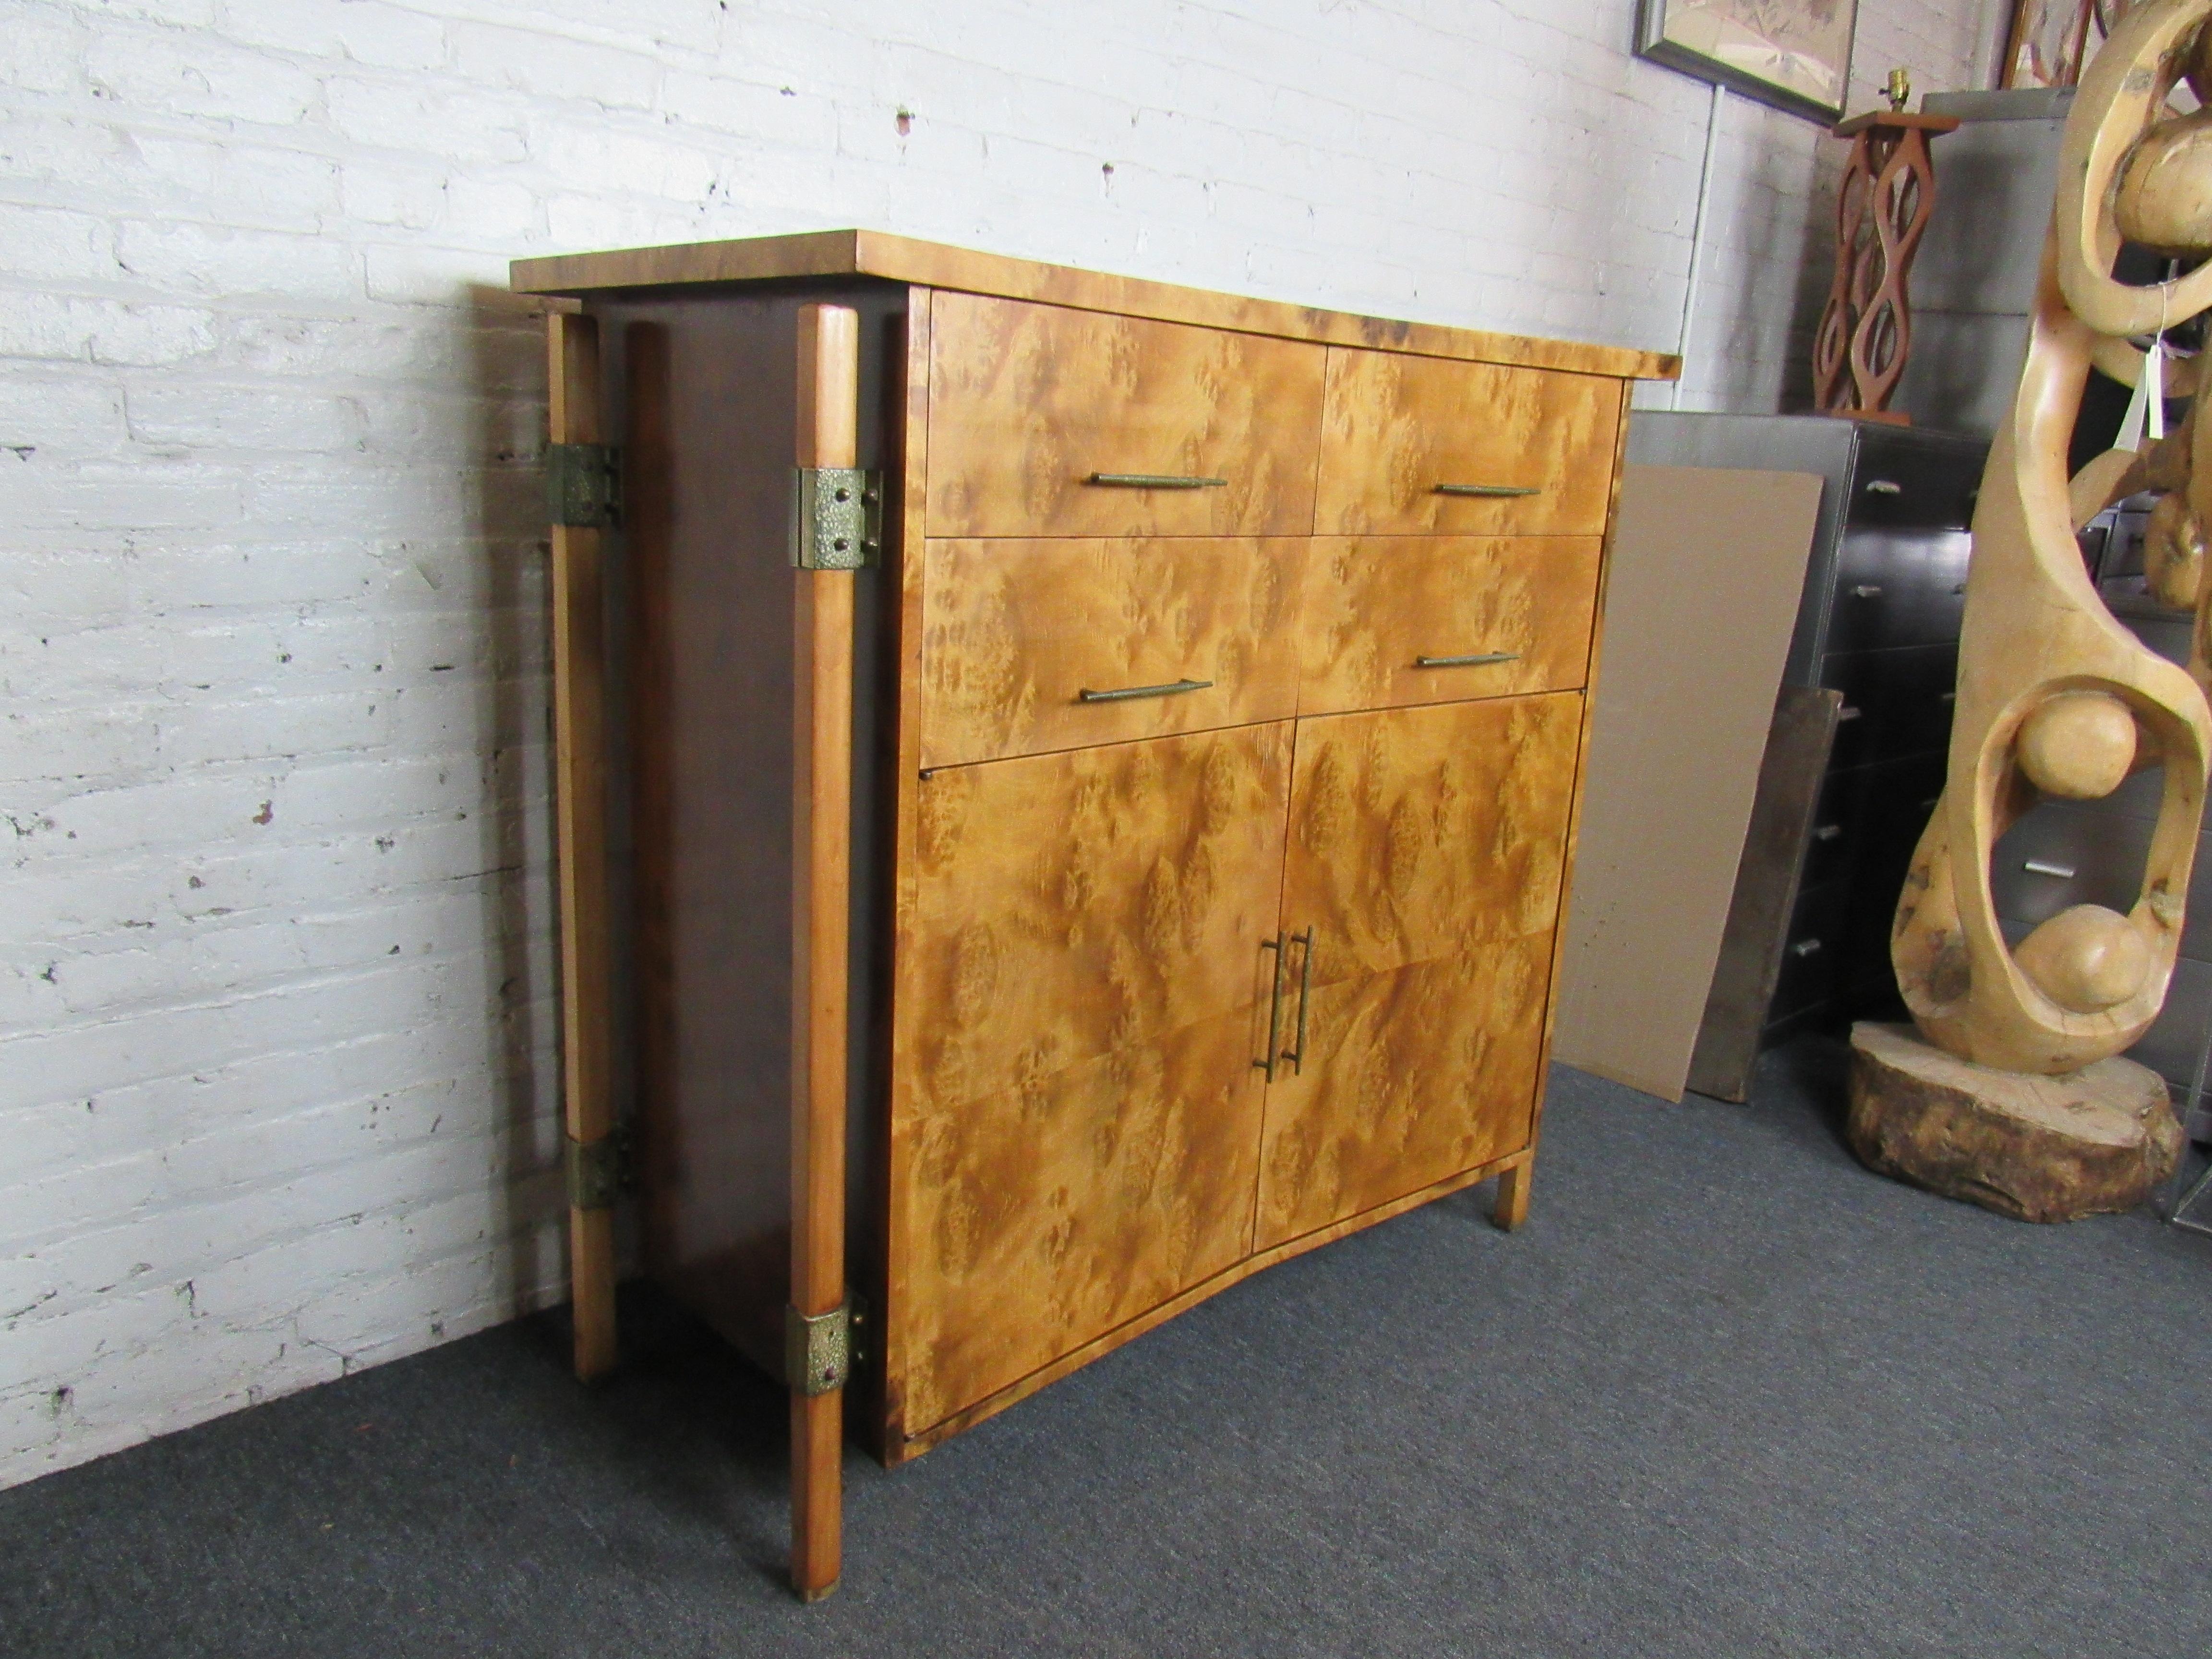 Exceptionally rare burled walnut gentleman's wardrobe from Harold Schwartz' iconic mid-century bedroom collection for Batesville, Indiana's RomWeber Furniture. The swirling natural wood grains create a wonderful contrast with the chest's classic